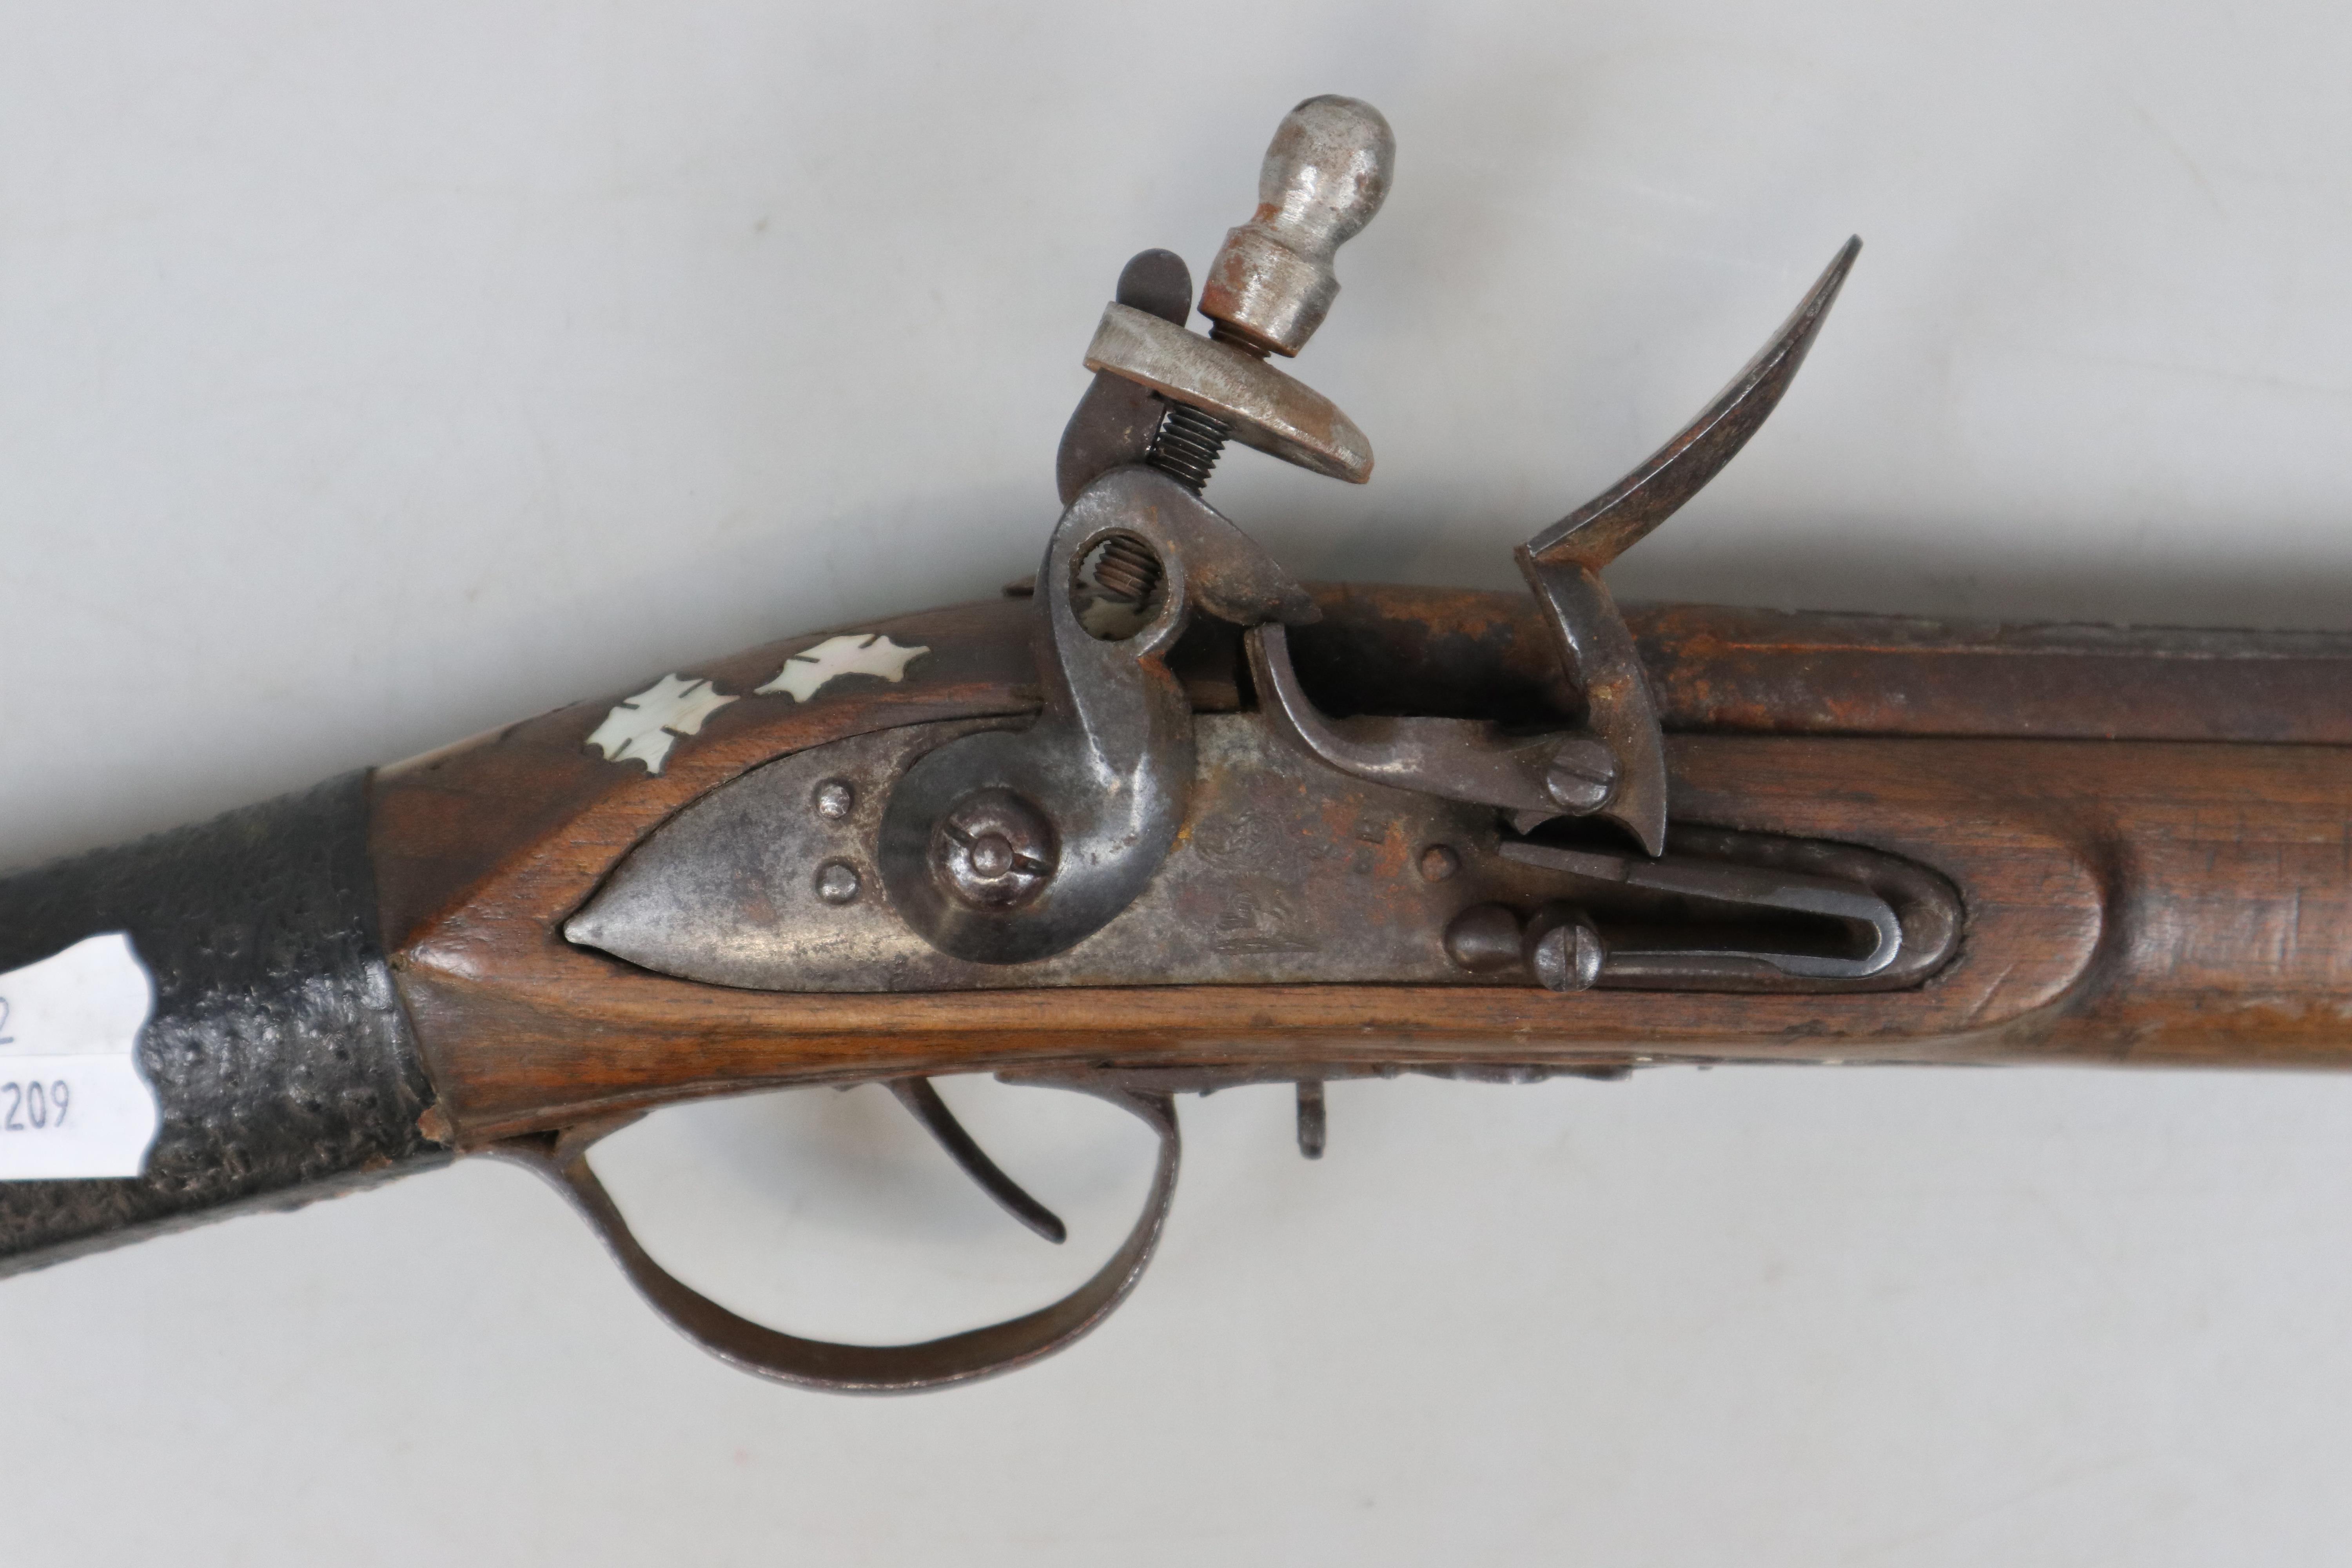 Antique blunderbuss inlaid with mother of pearl - Image 3 of 4